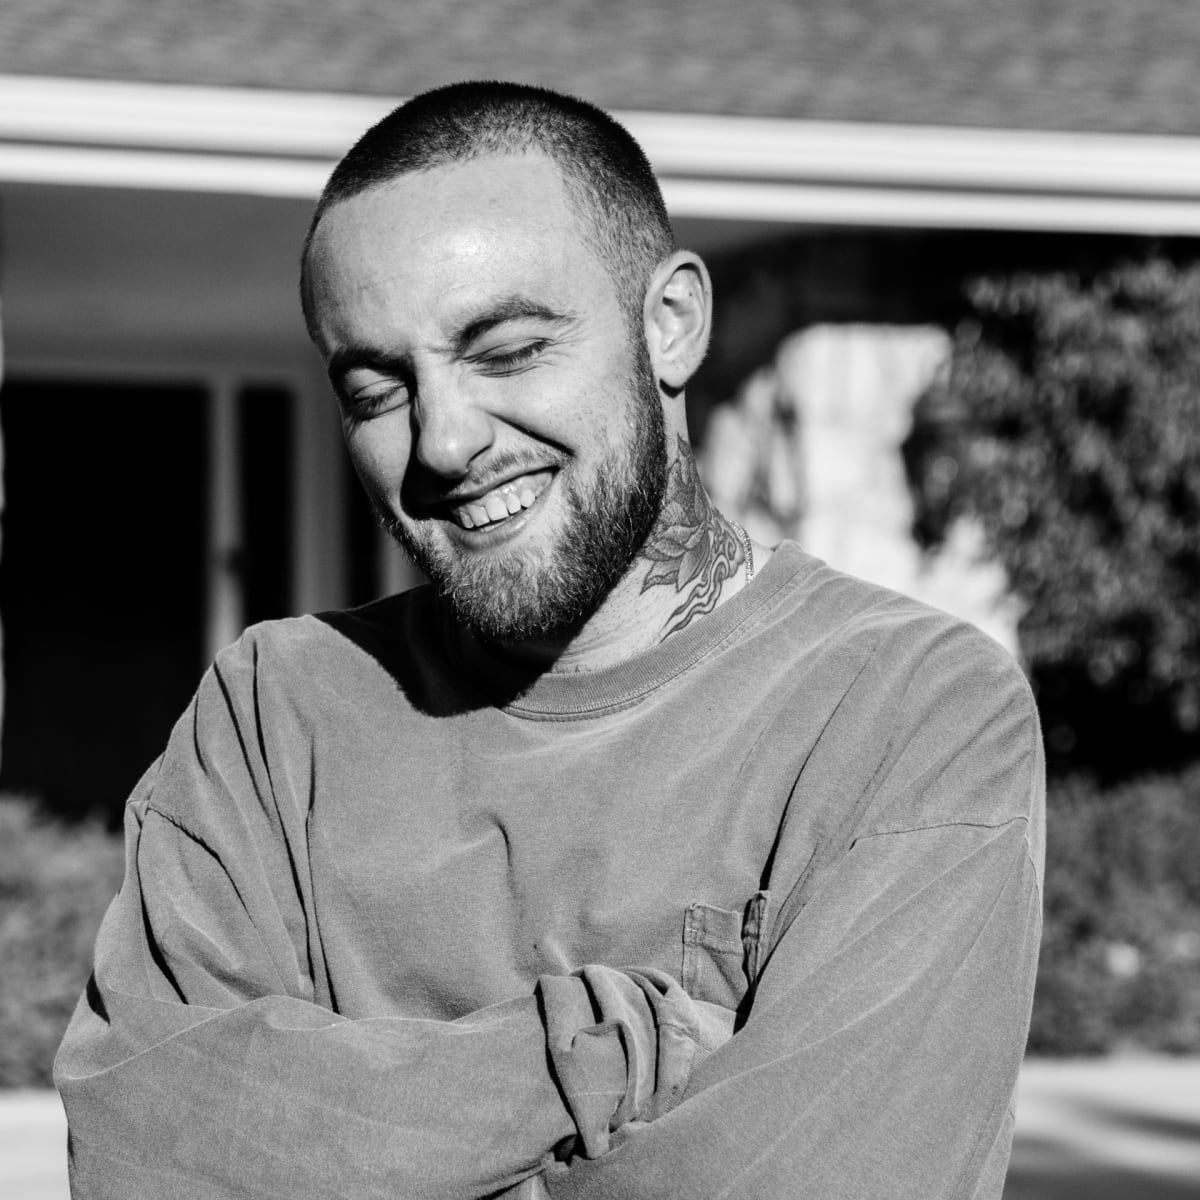 toxicology report for mac miller